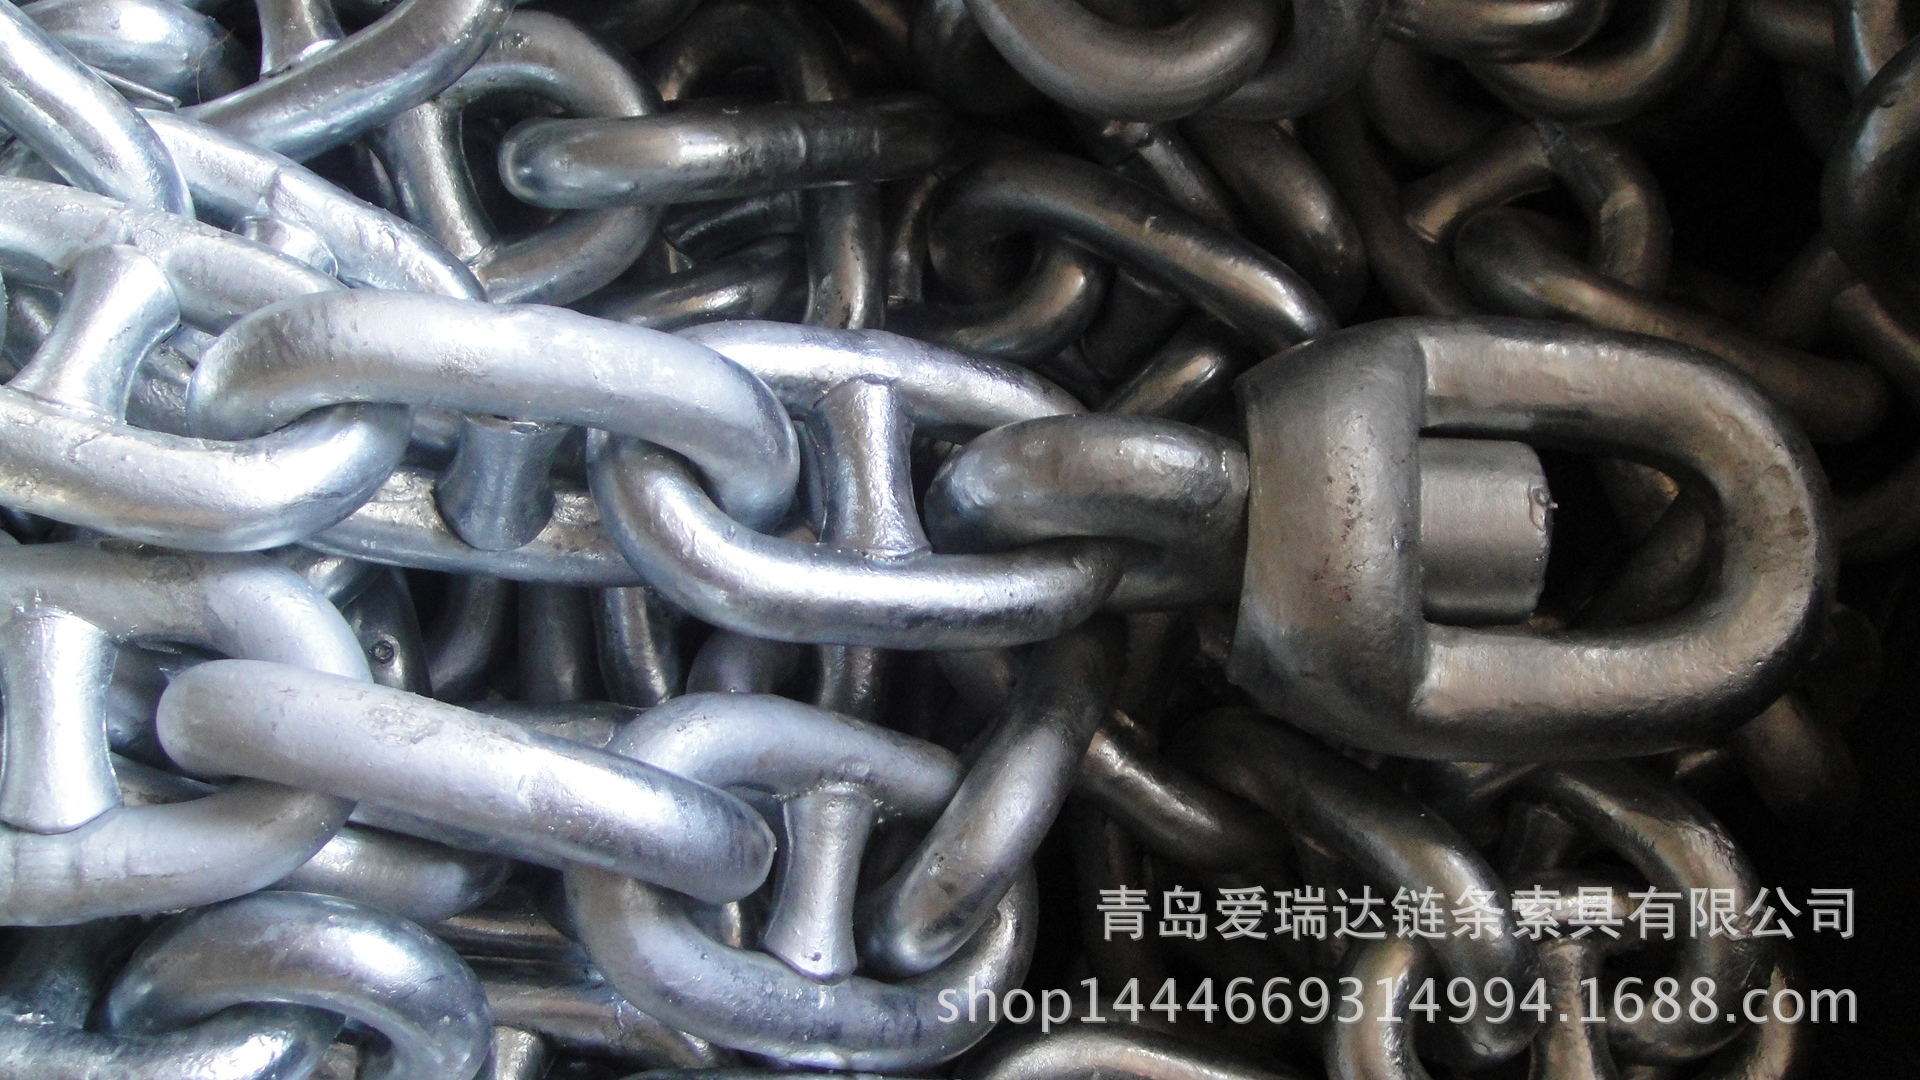 Function of the anchor chain